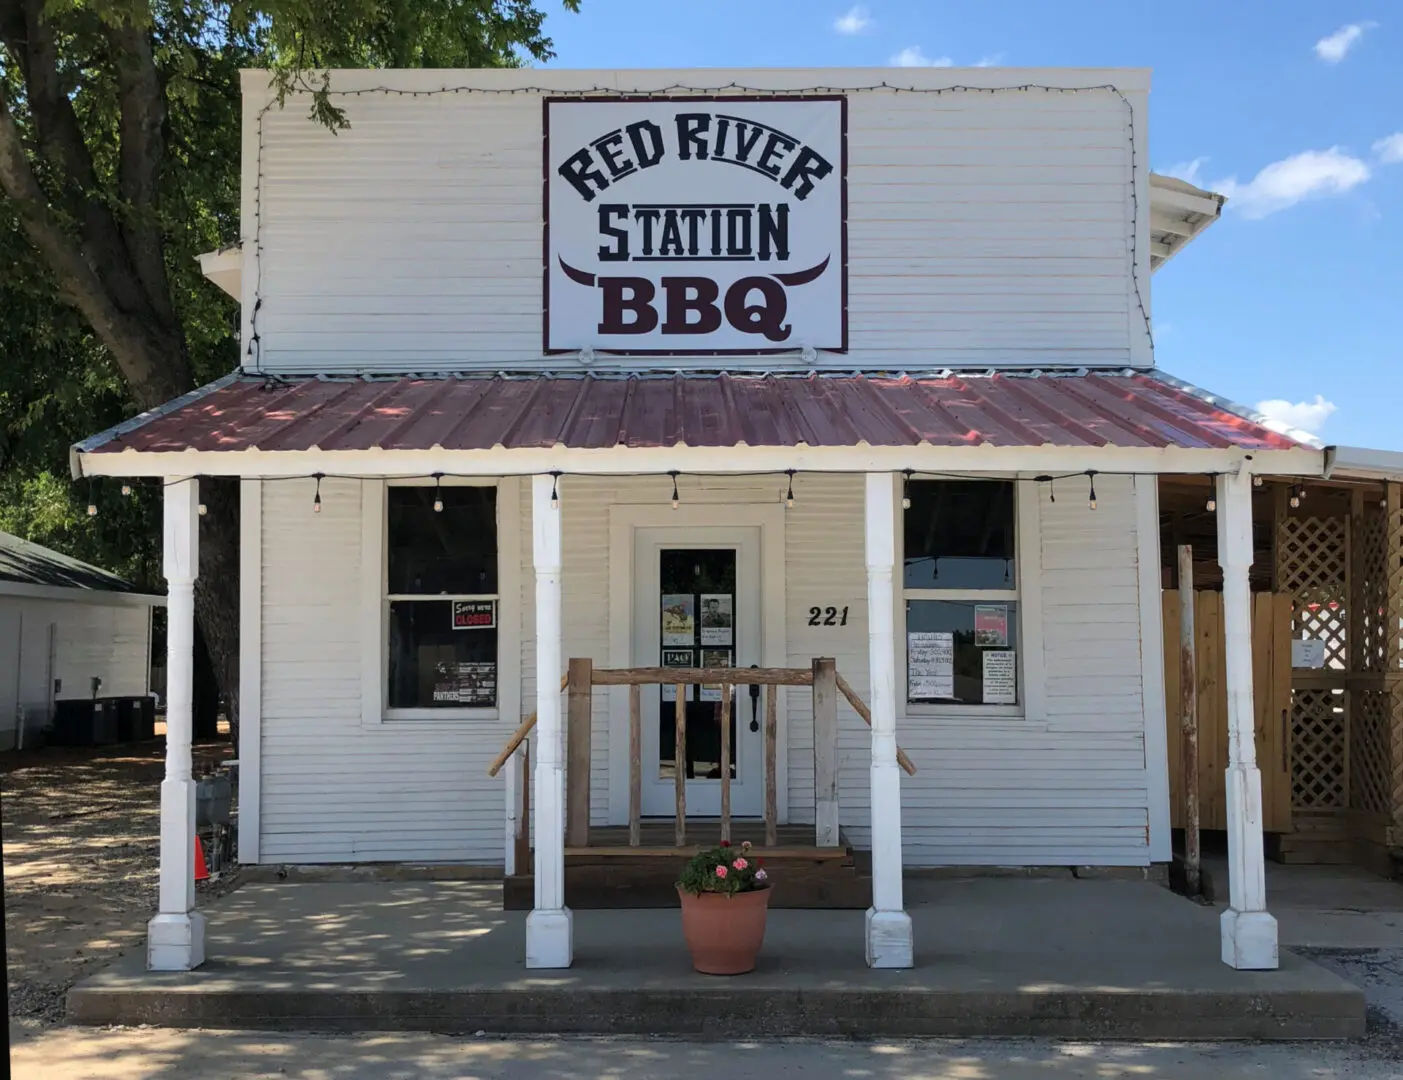 Red River Station